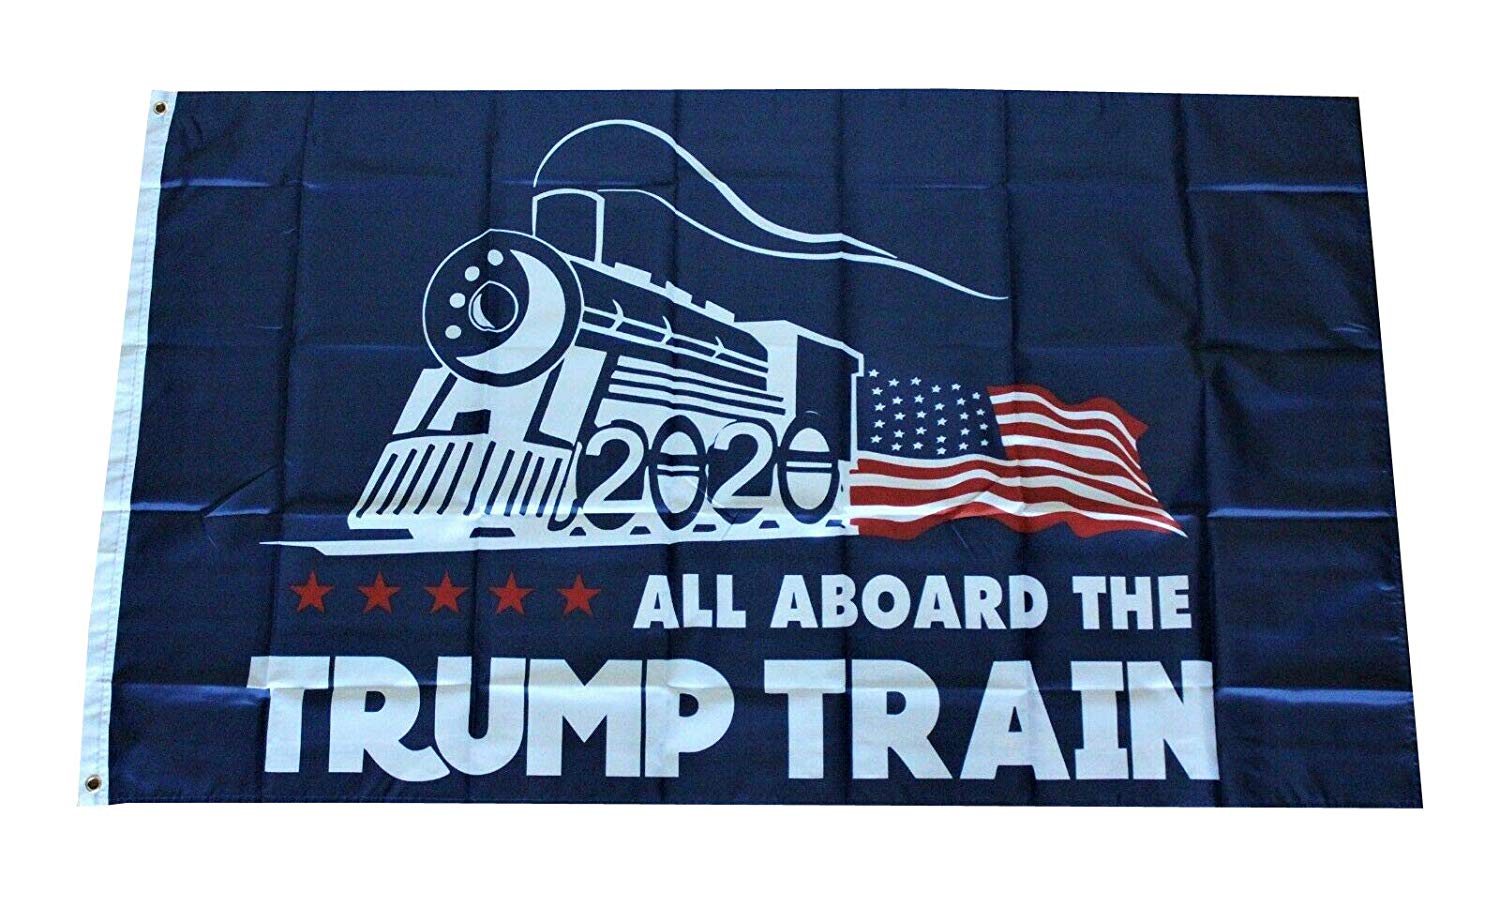 THE HOP ON THE TRUMP TRAIN AND KEEP AMERICA GREAT!